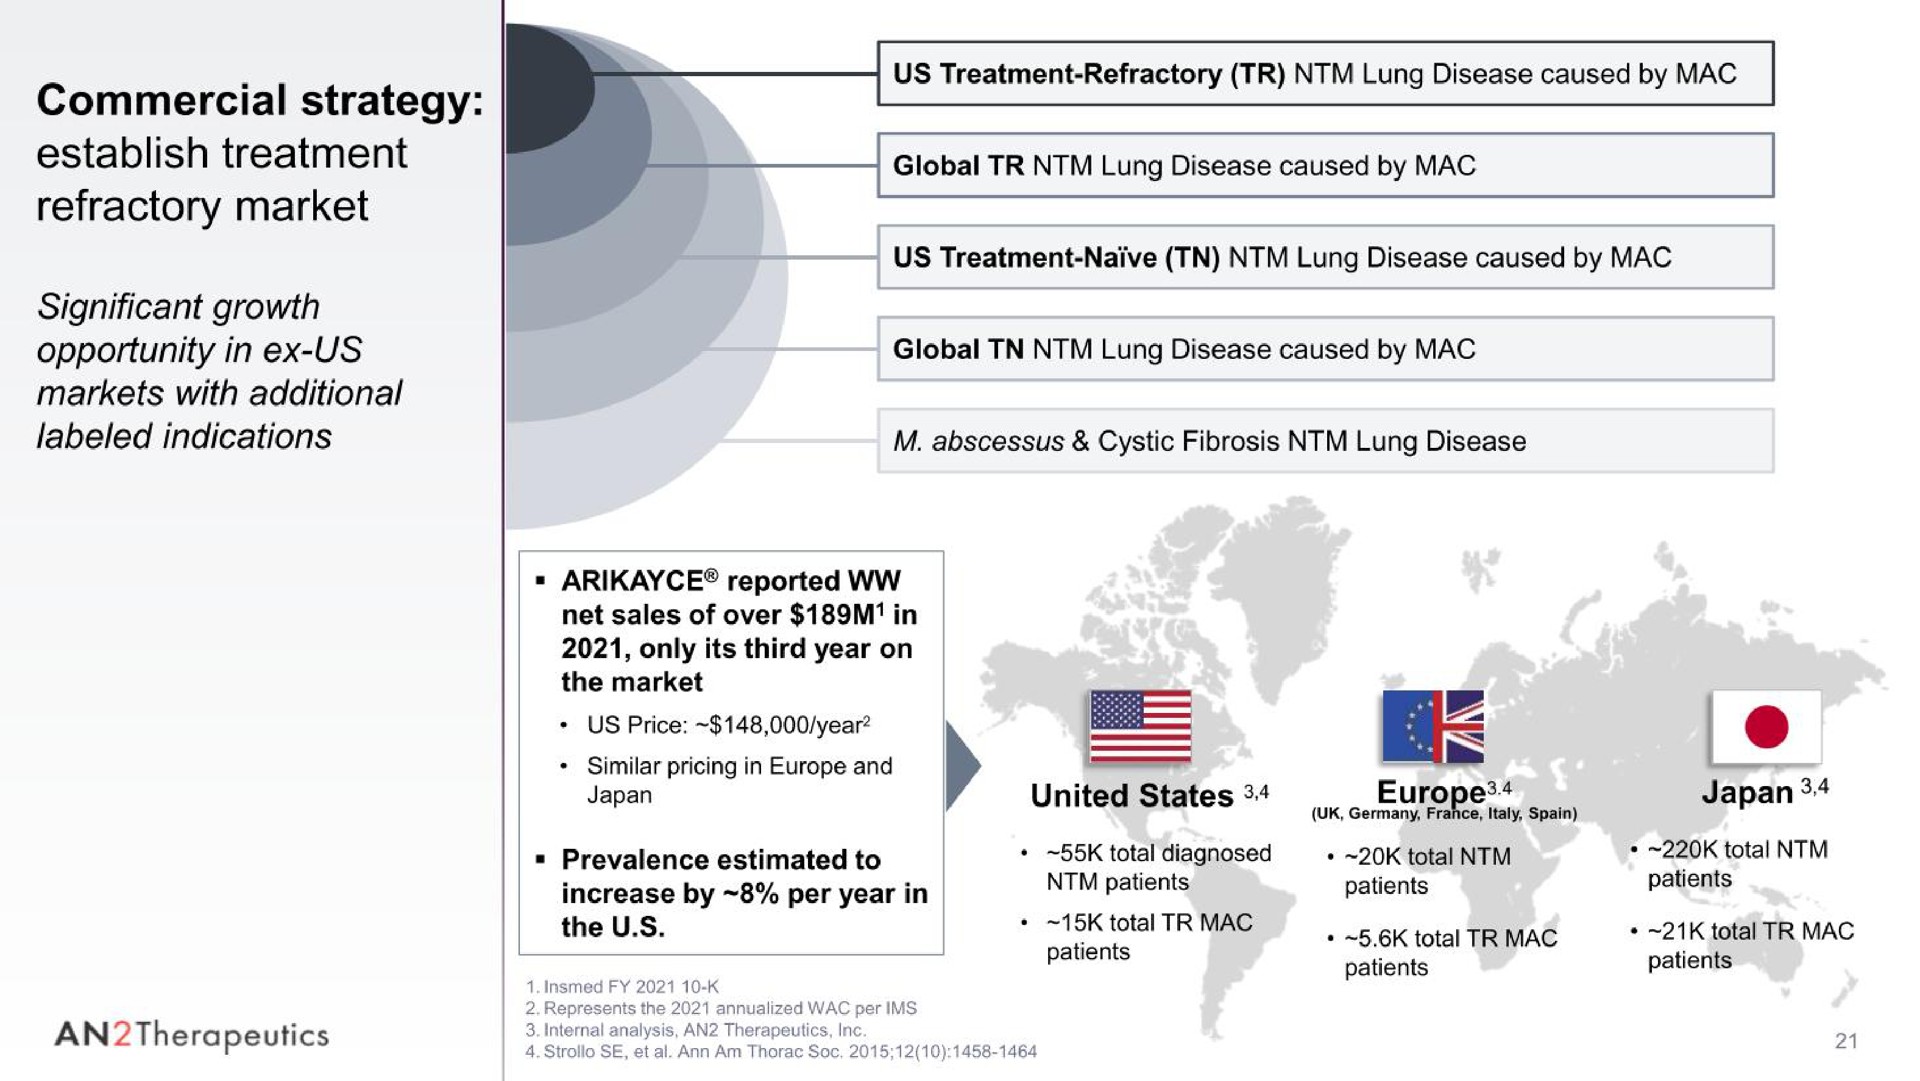 commercial strategy establish treatment refractory market significant growth opportunity in us markets with additional labeled indications japan an therapeutics | AN2 Therapeutics